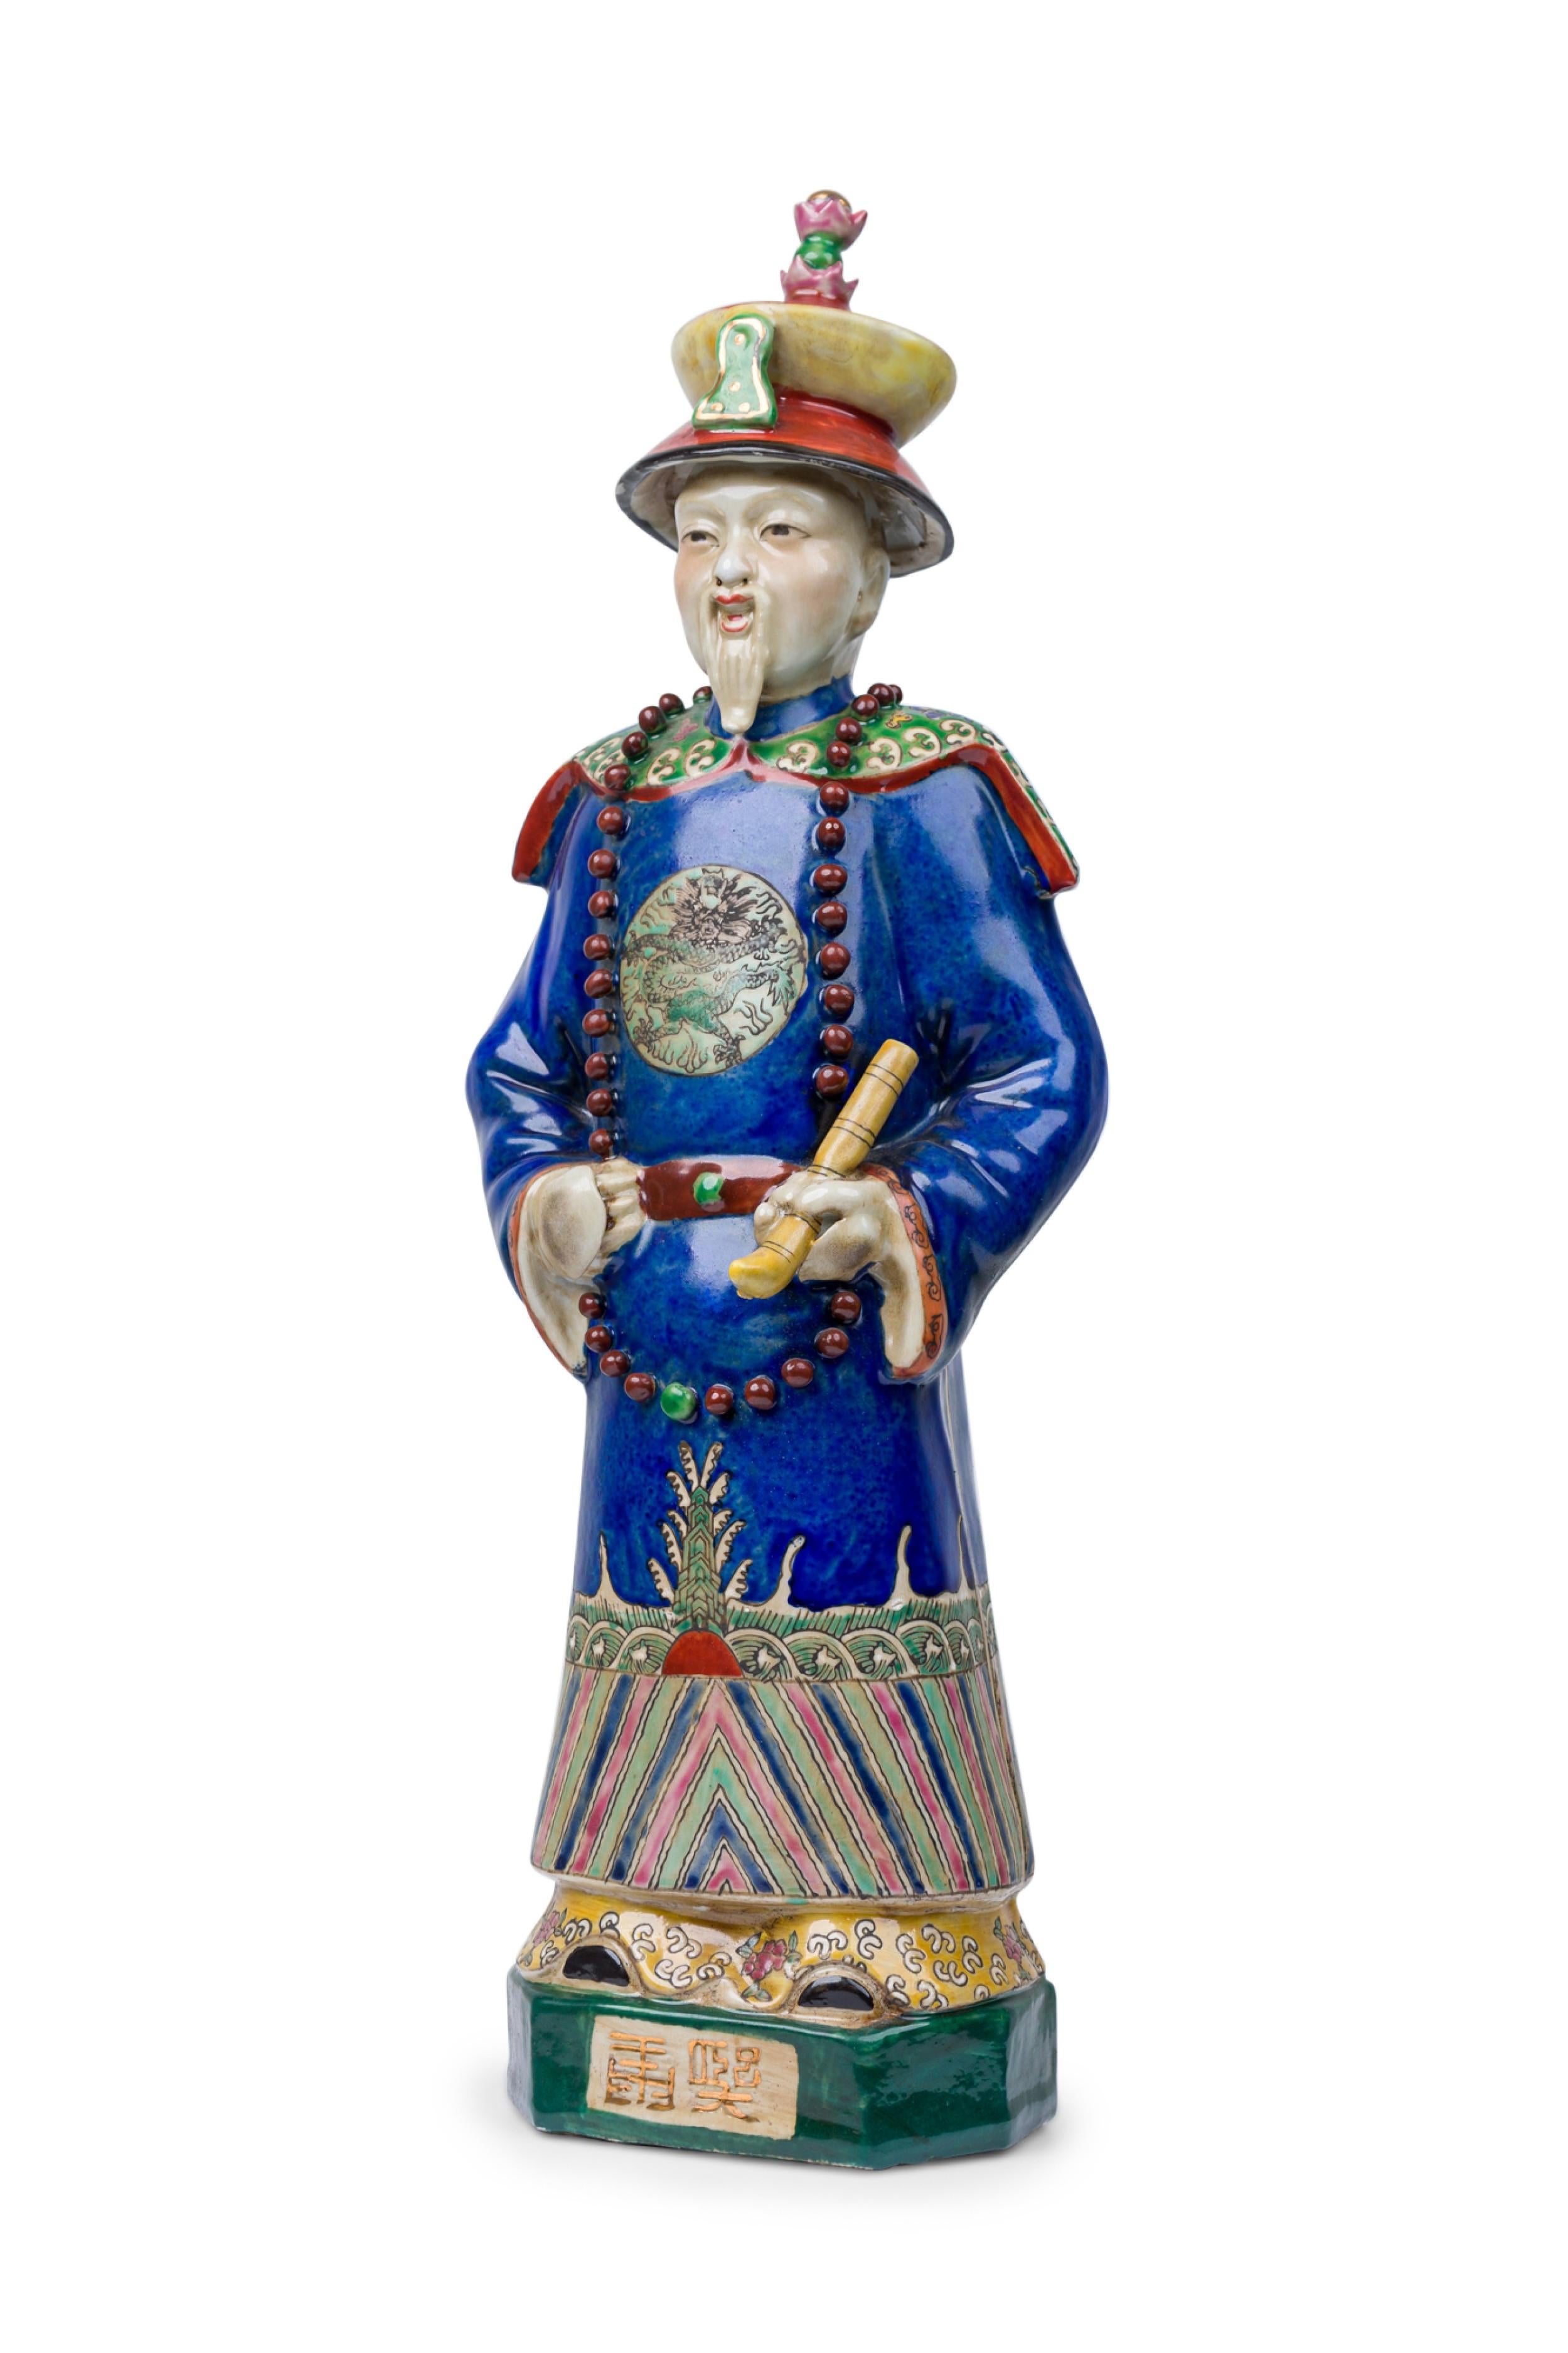 Pair of Chinese Painted Ceramic Figures Depicting a Blue Robed Emperor For Sale 2